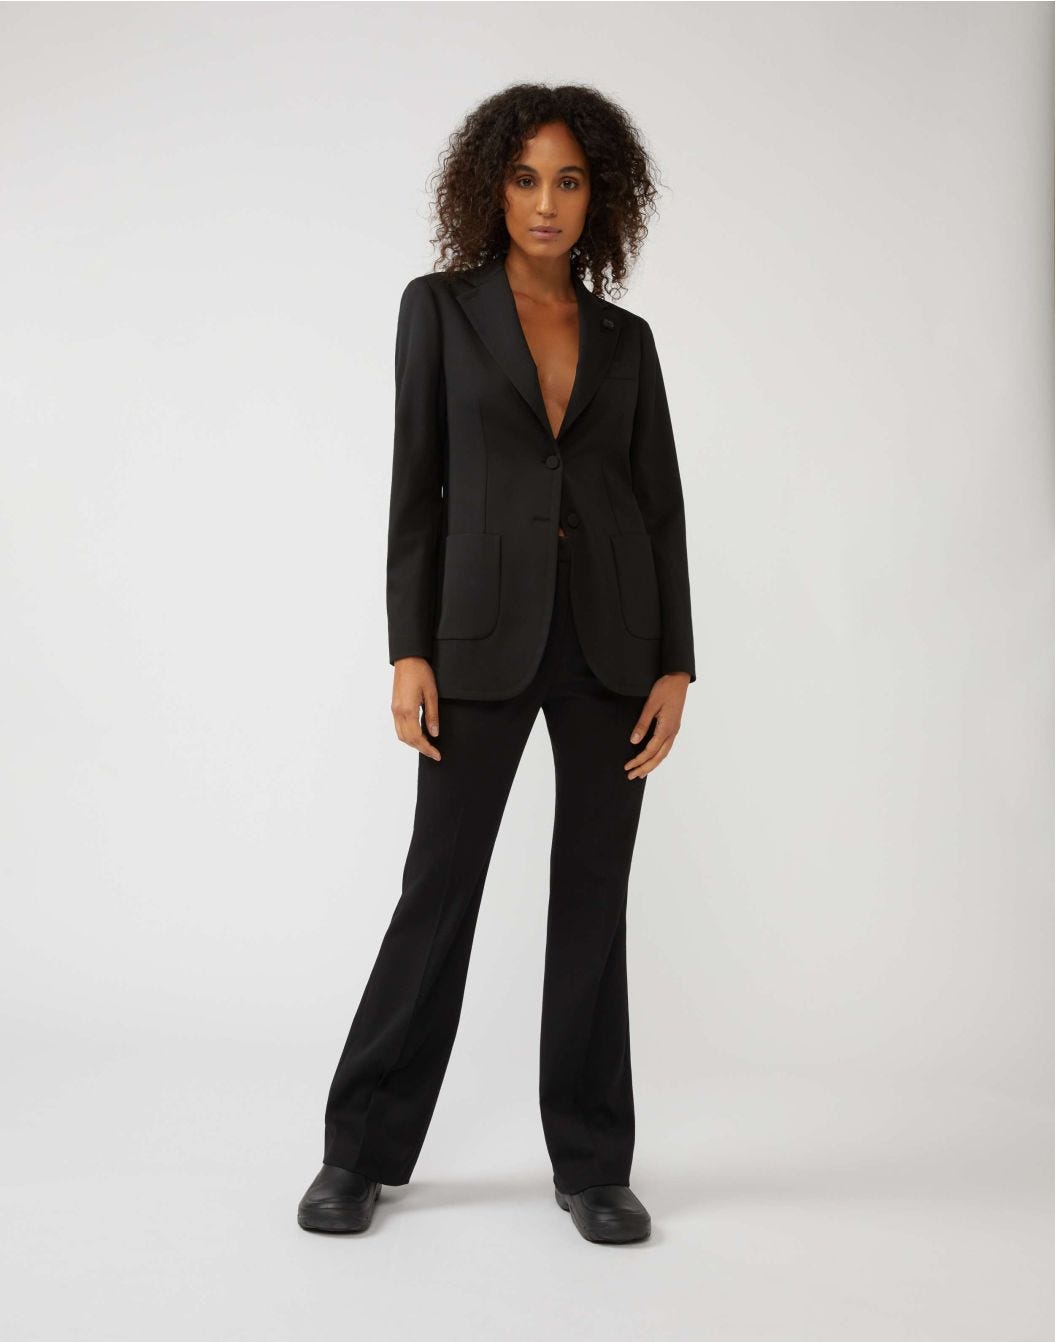 Bell-bottom trousers in cool black wool